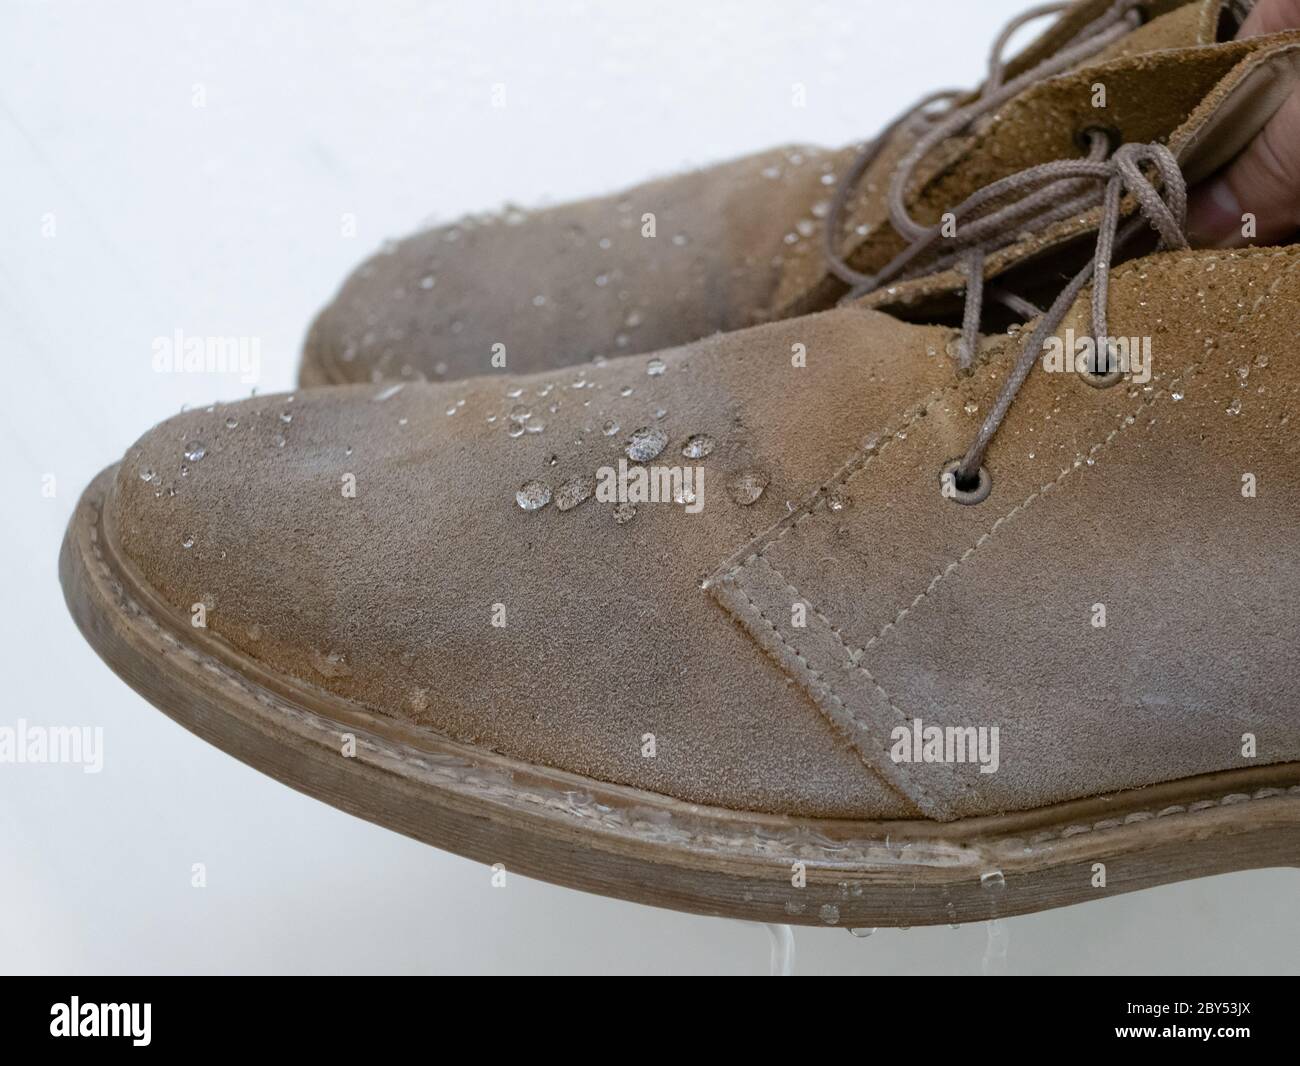 spray to waterproof suede boots